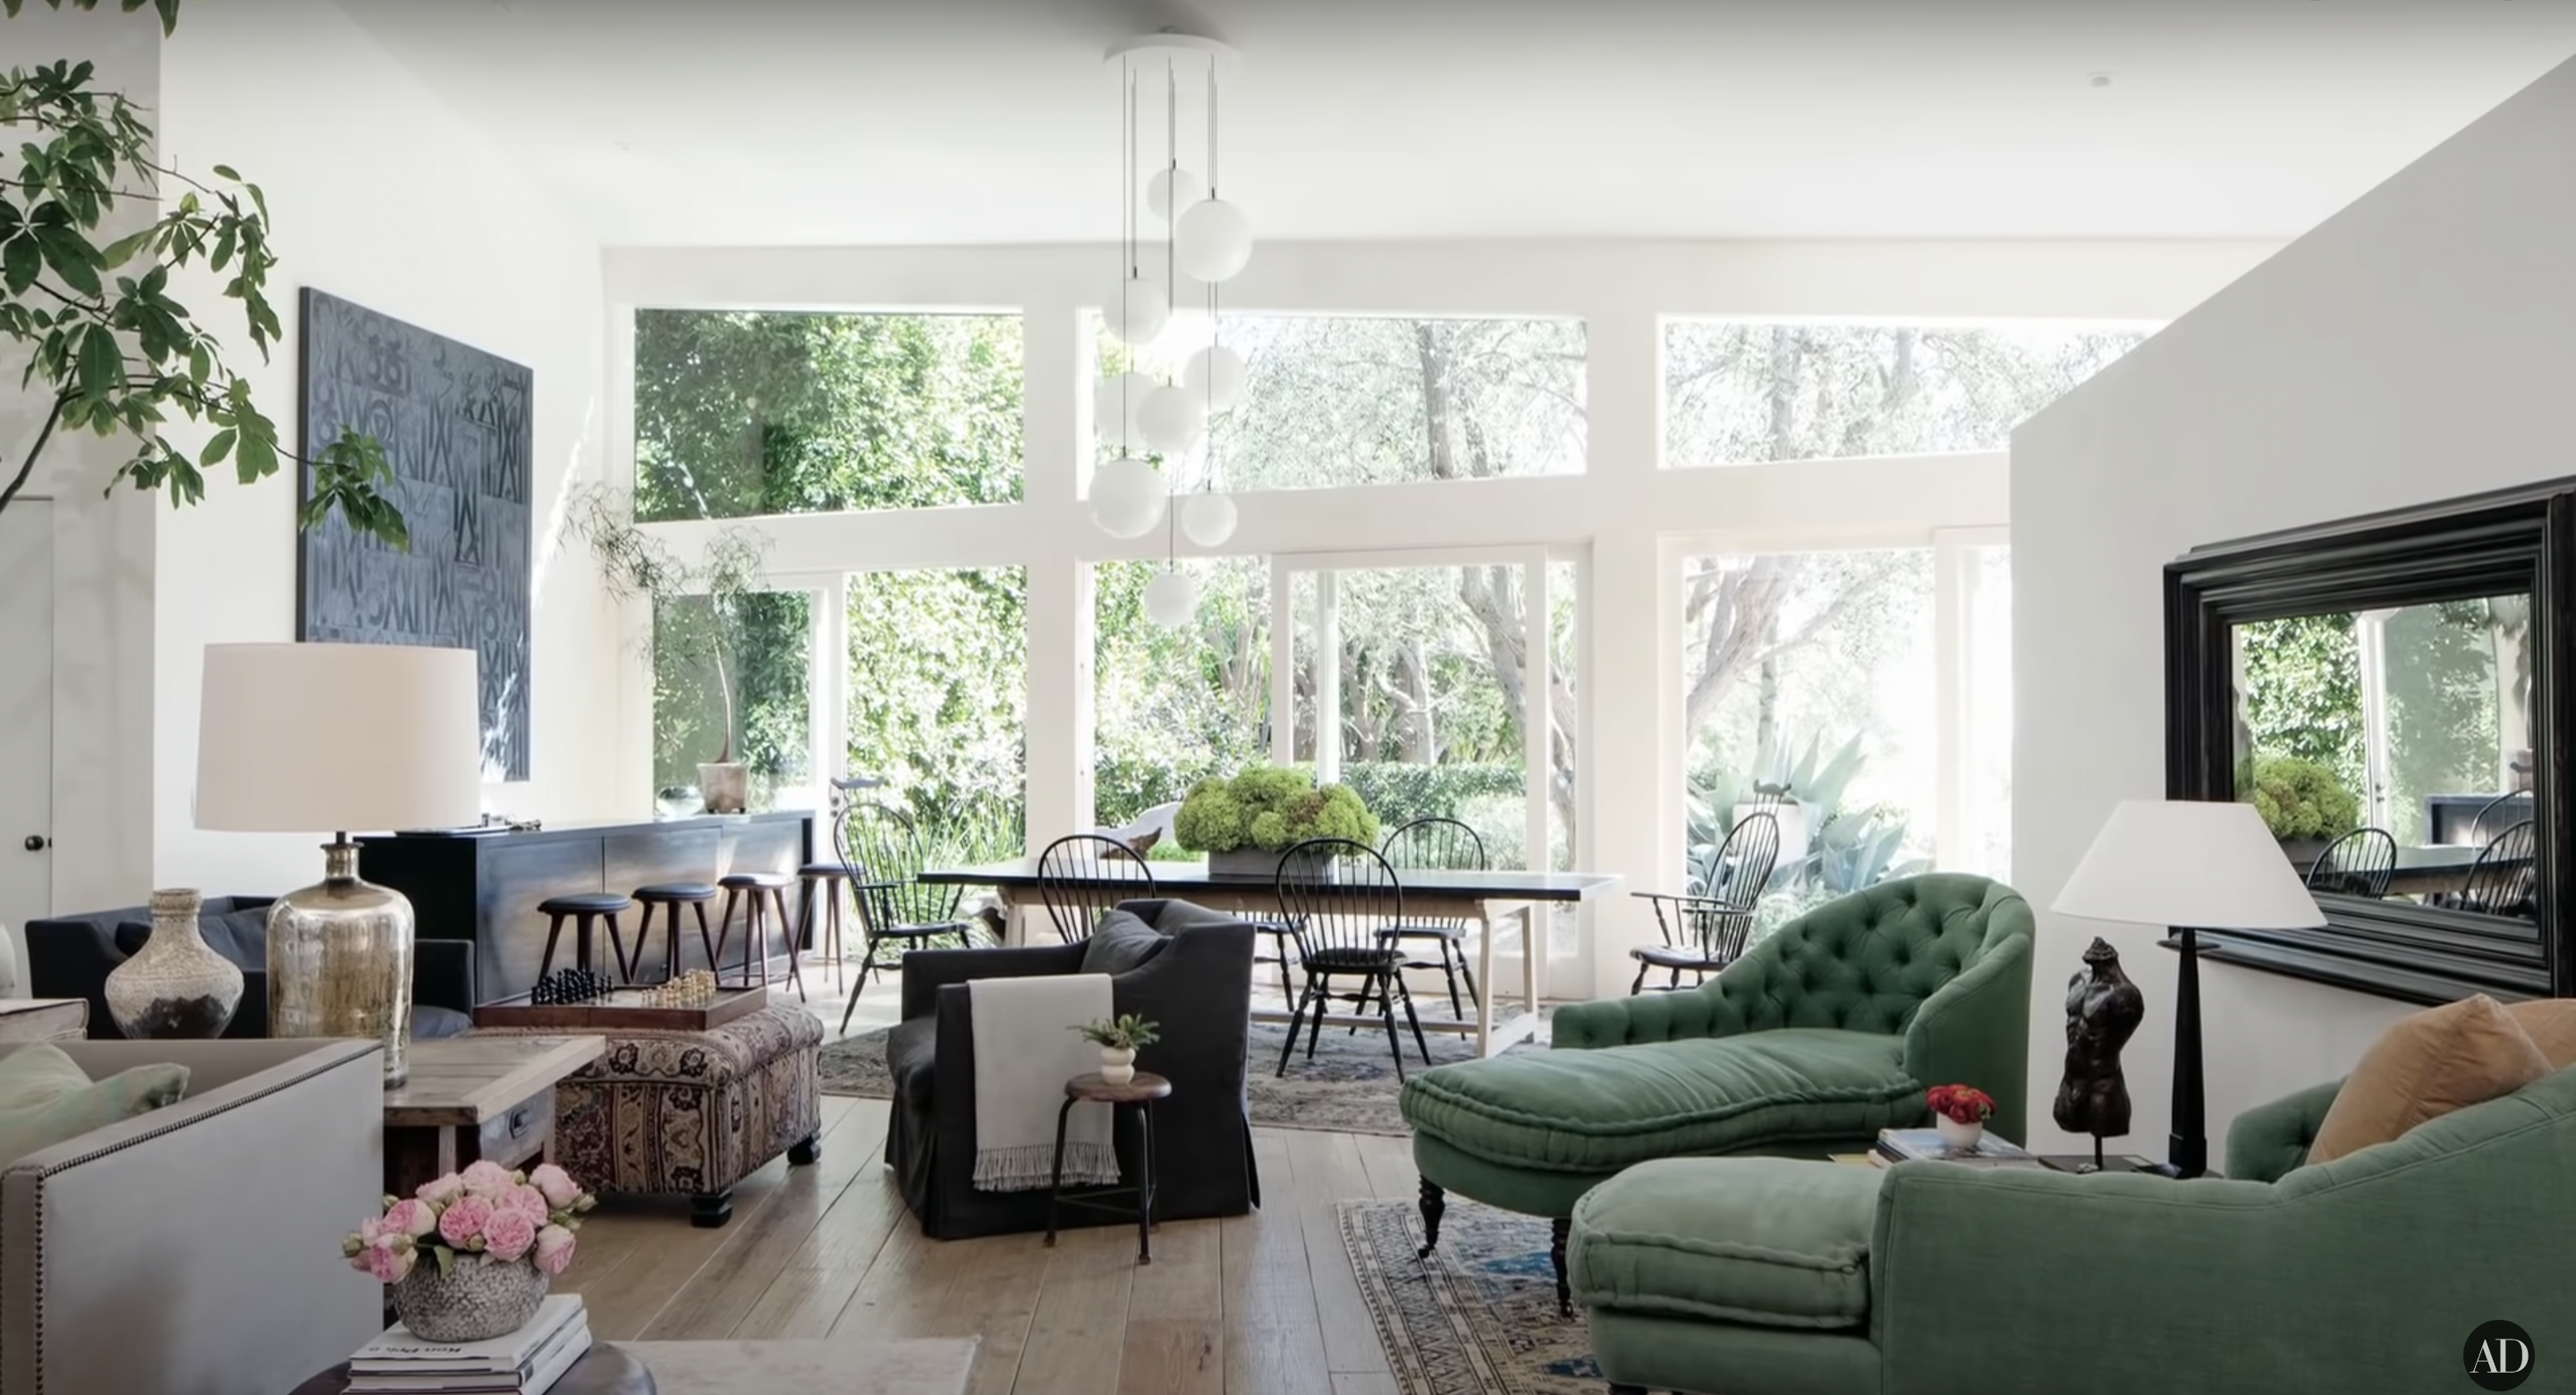 Patrick Dempsey's former Malibu home from a video dated October 29, 2014 | Source: youtube.com/@Archdigest